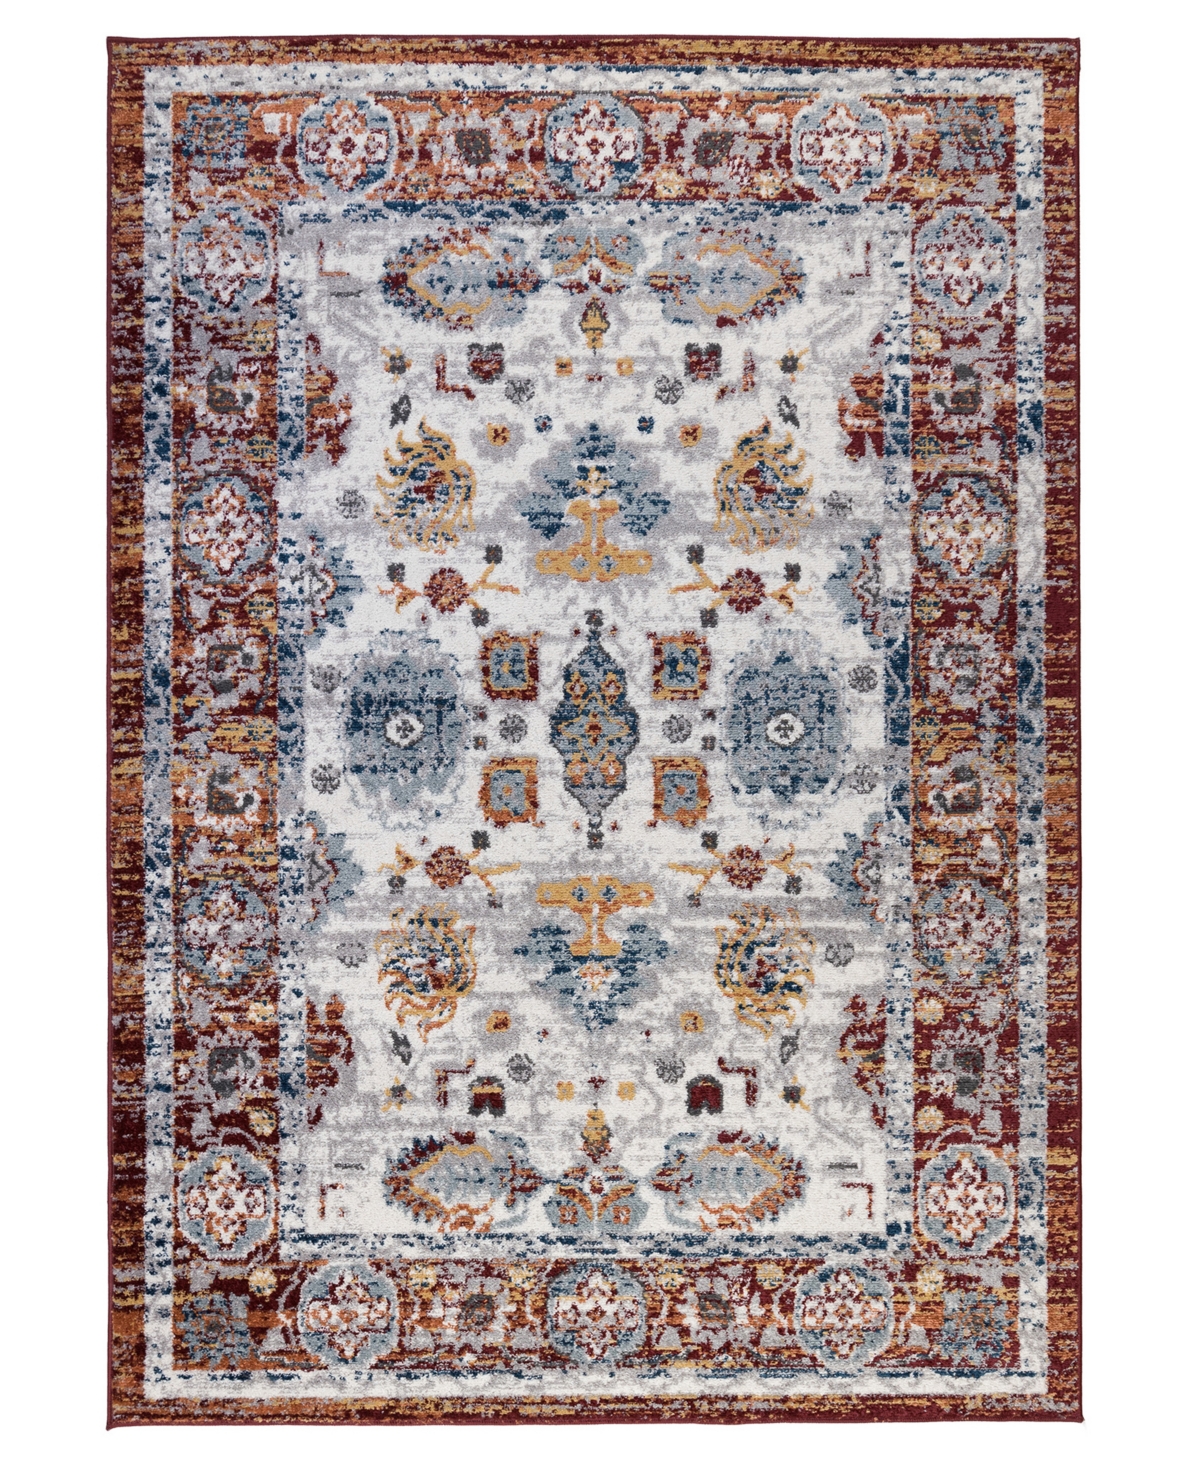 Km Home Gadsby Gad87 7'9" X 9'9" Area Rug In Brown